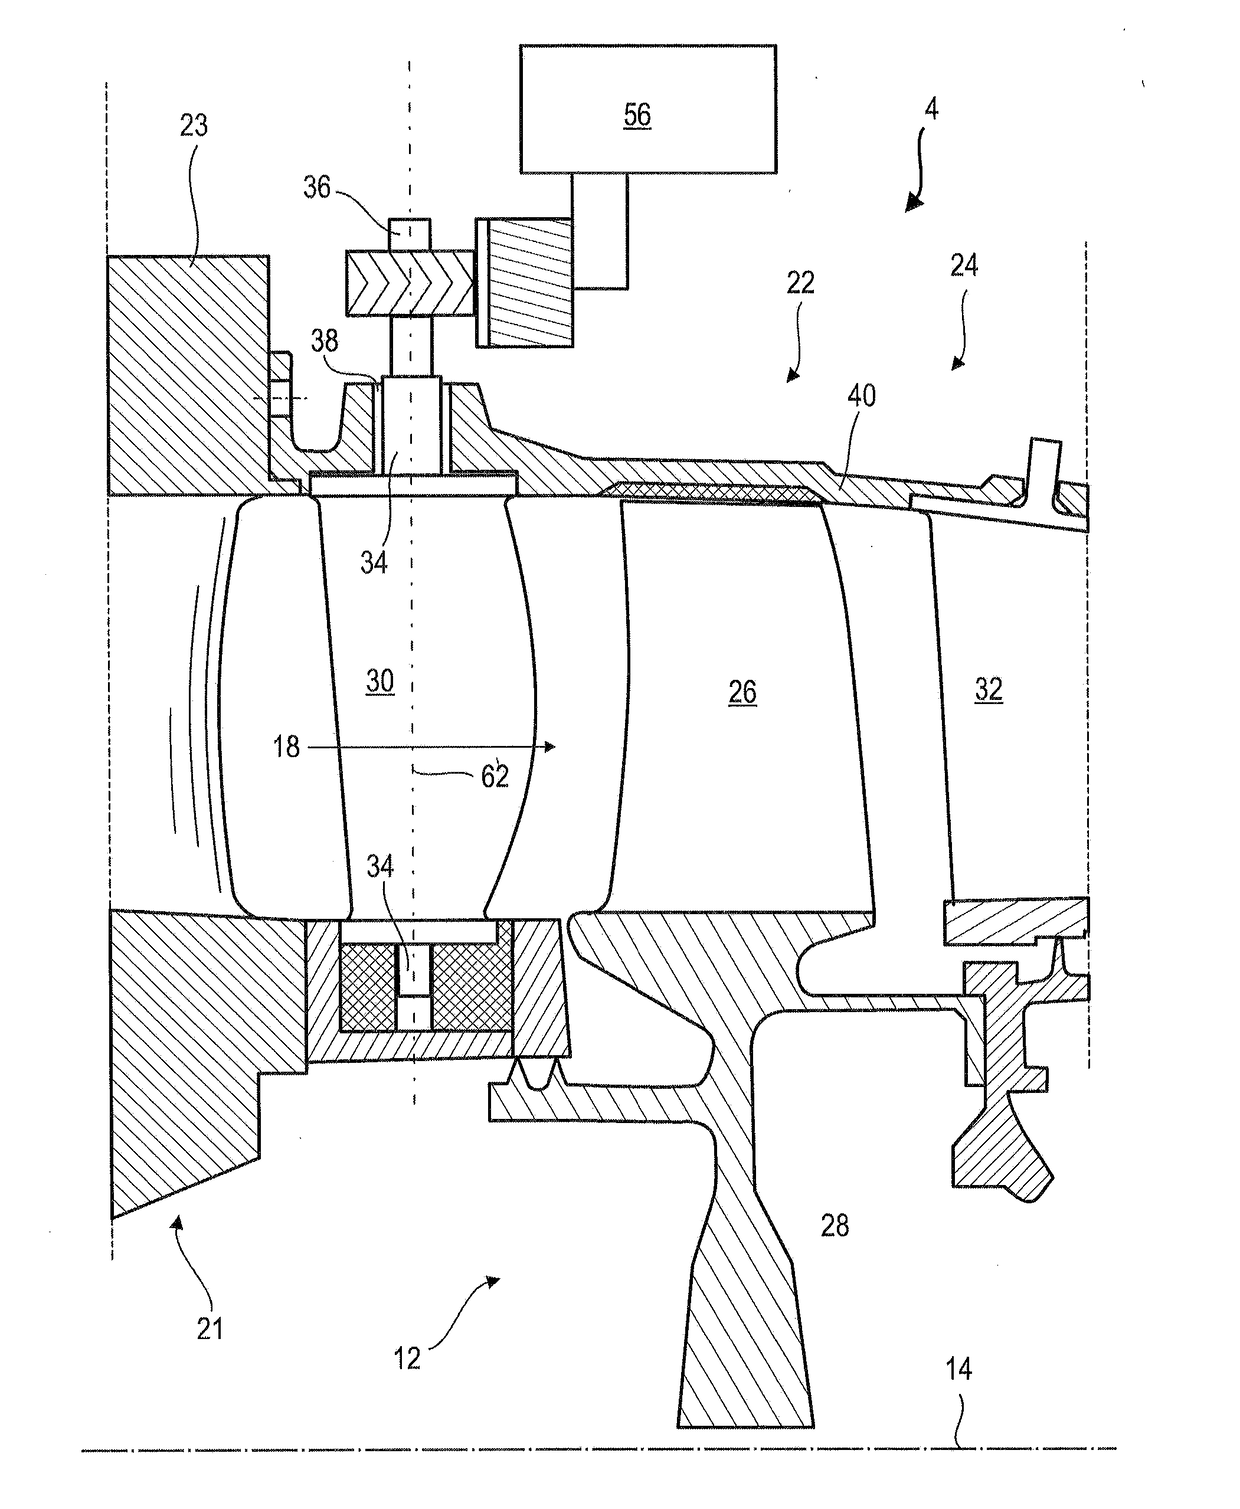 Turbine Engine Compressor with Variable-Pitch Vanes